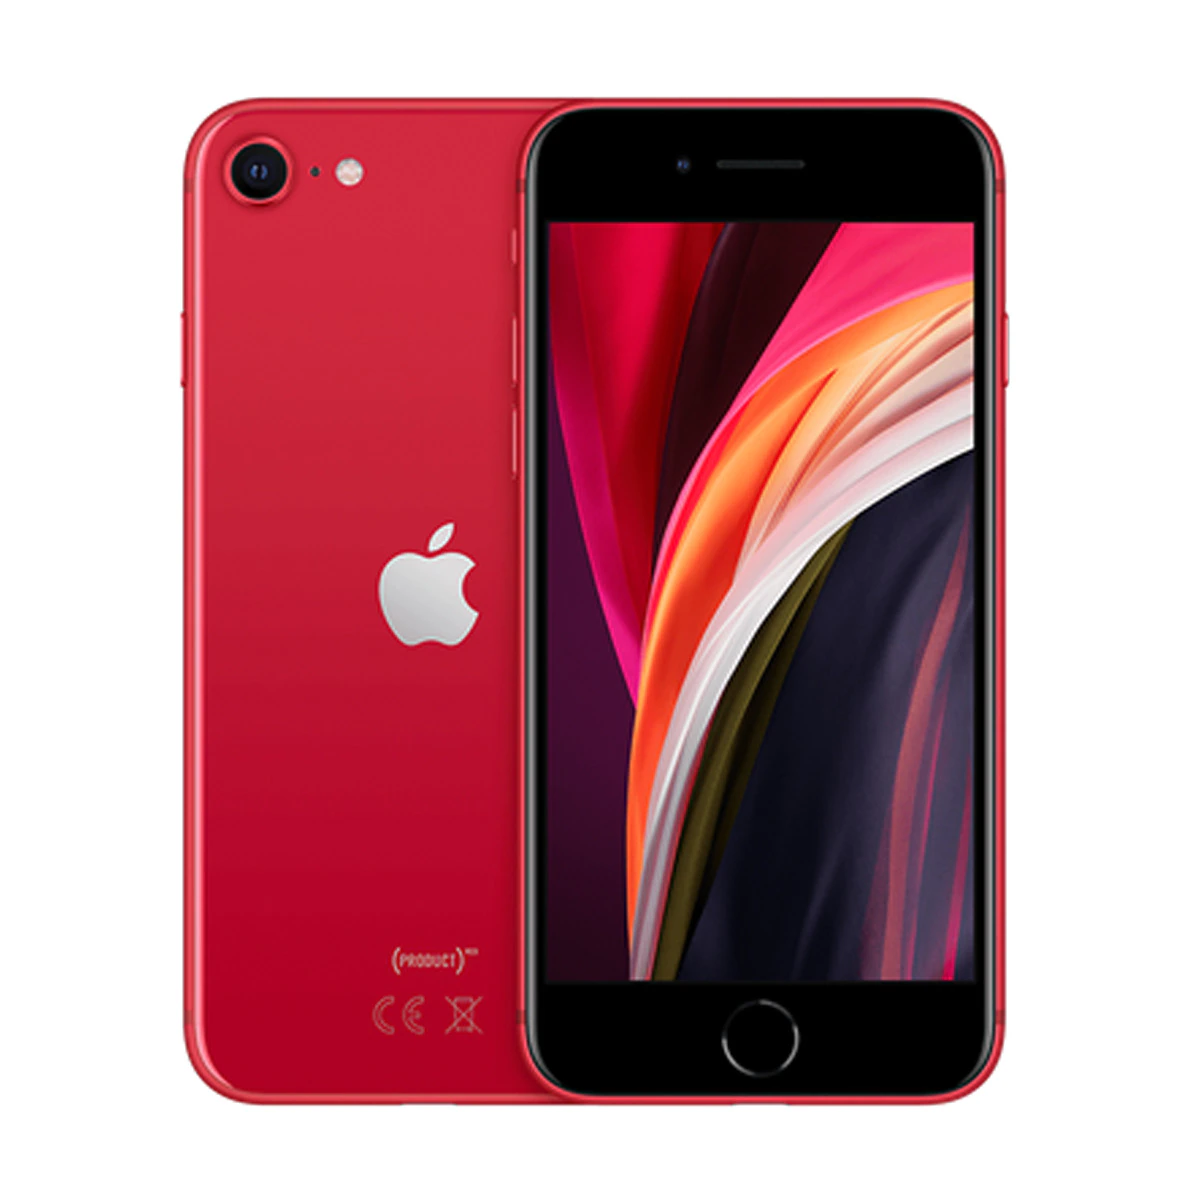 Apple iPhone SE (2020) 128GB PRODUCT(RED) Sin Accesorios móvil libre